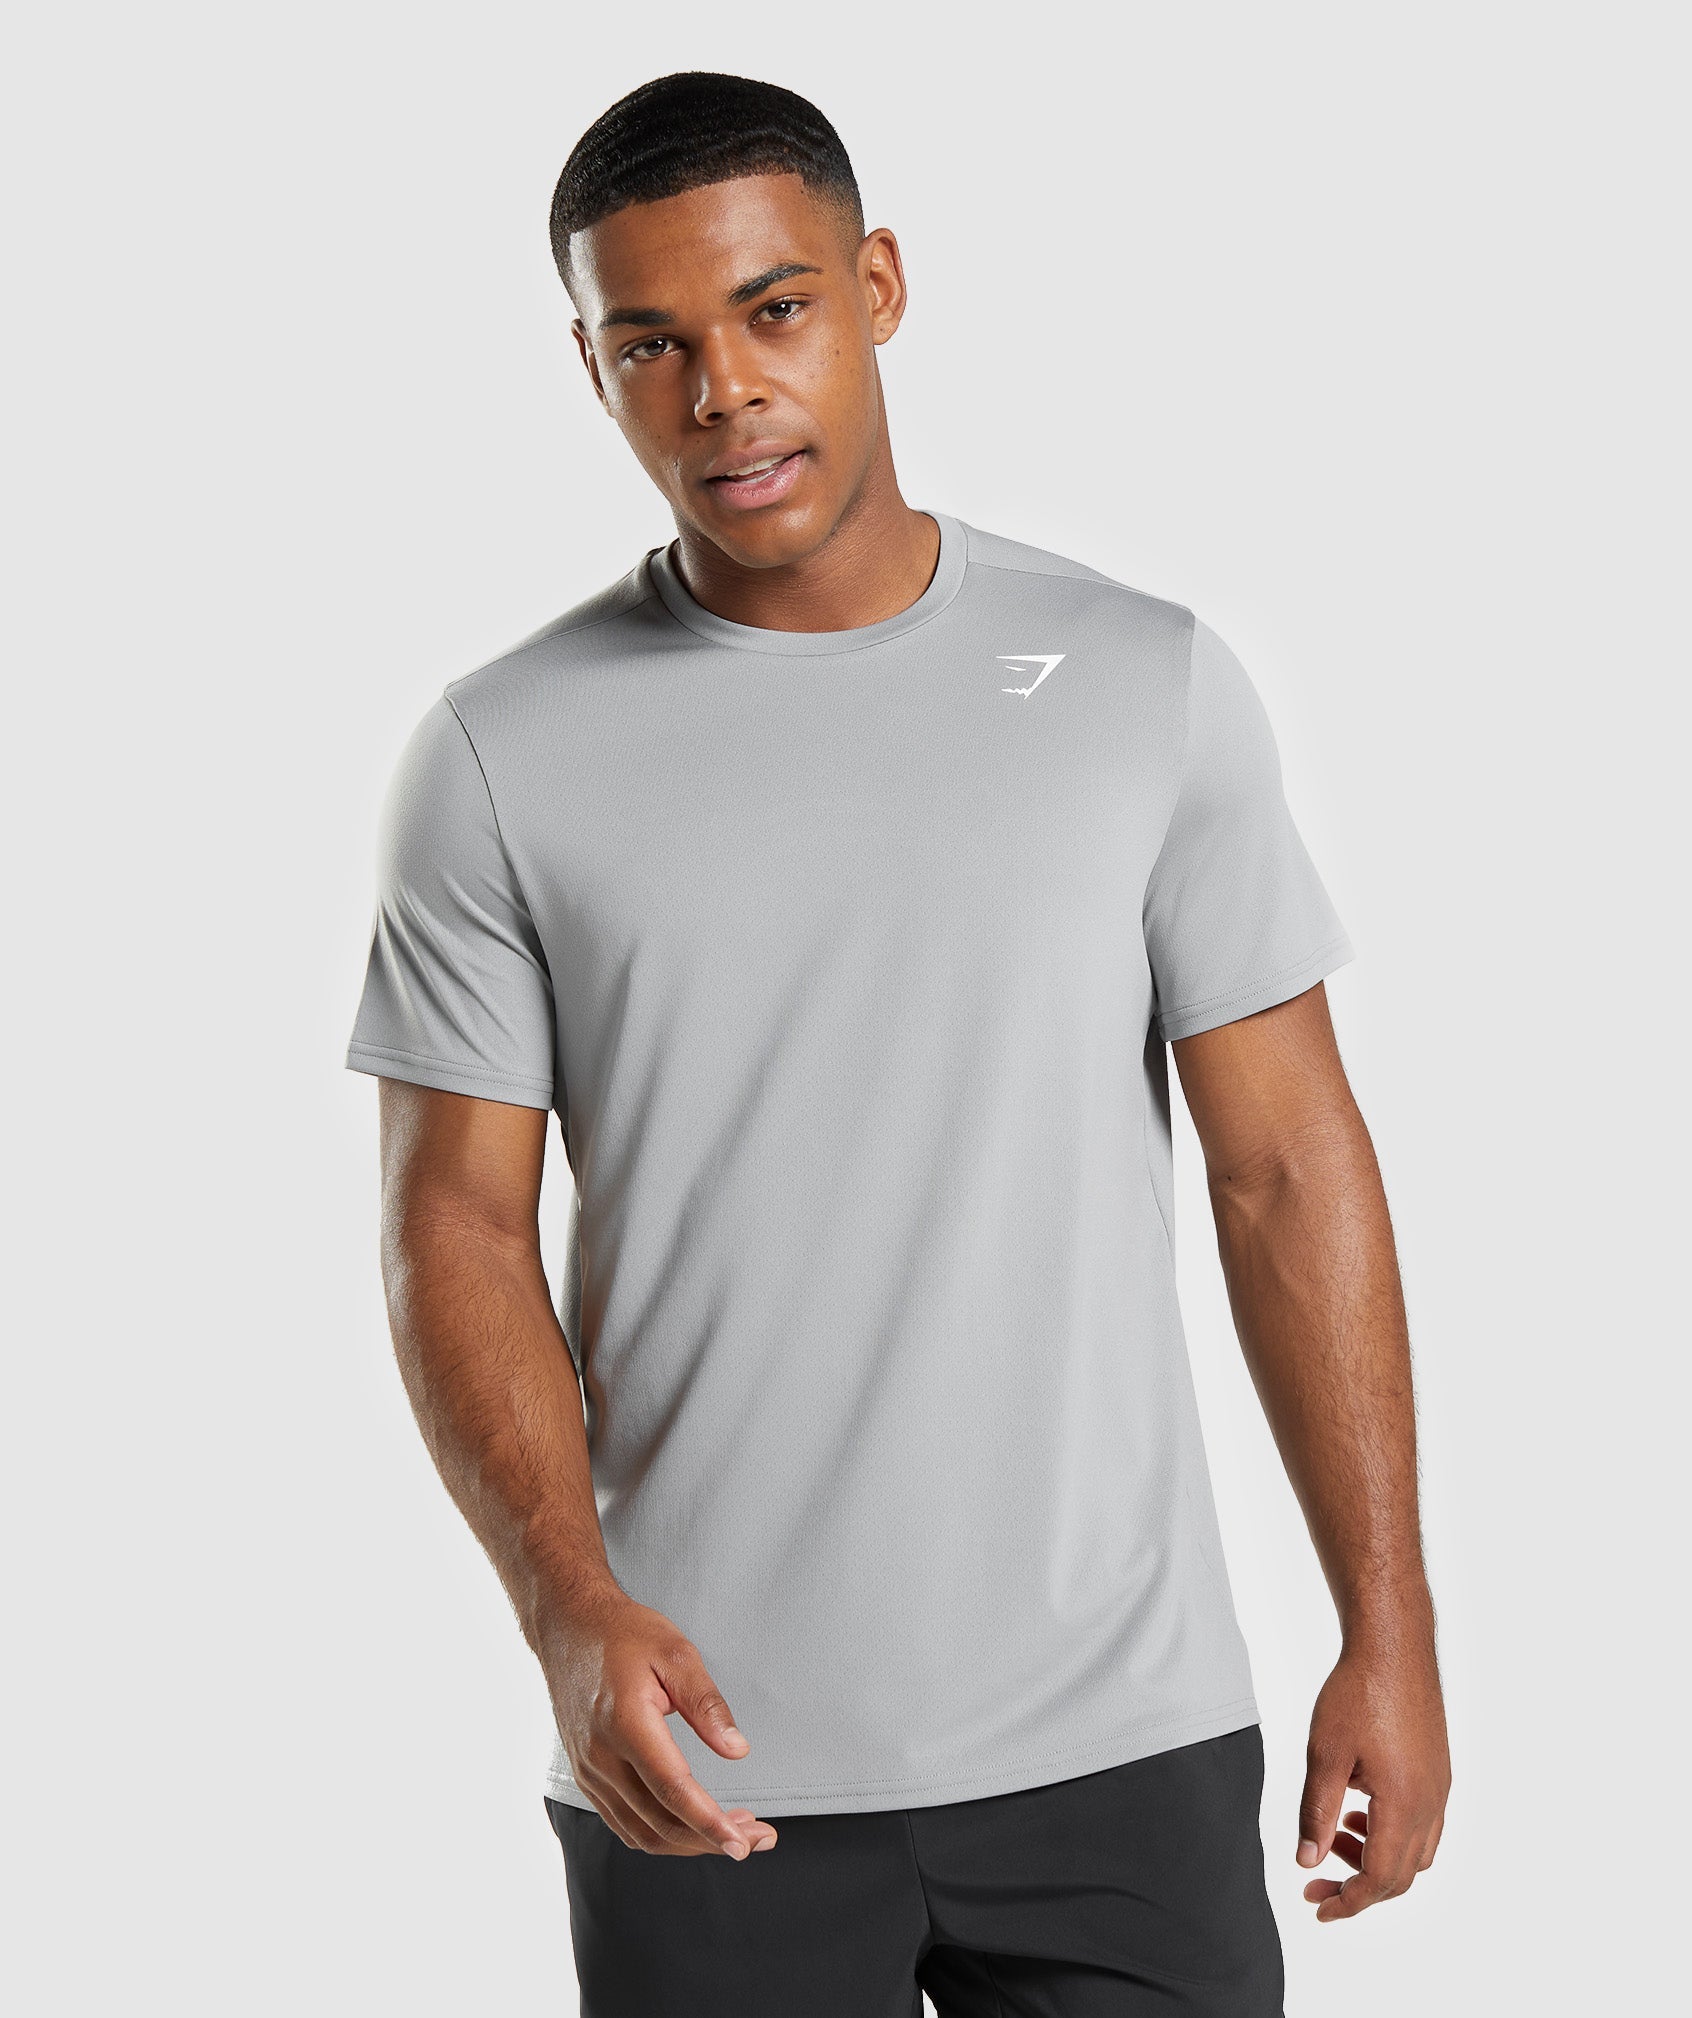 Arrival Regular Fit T-Shirt in Smokey Grey - view 1